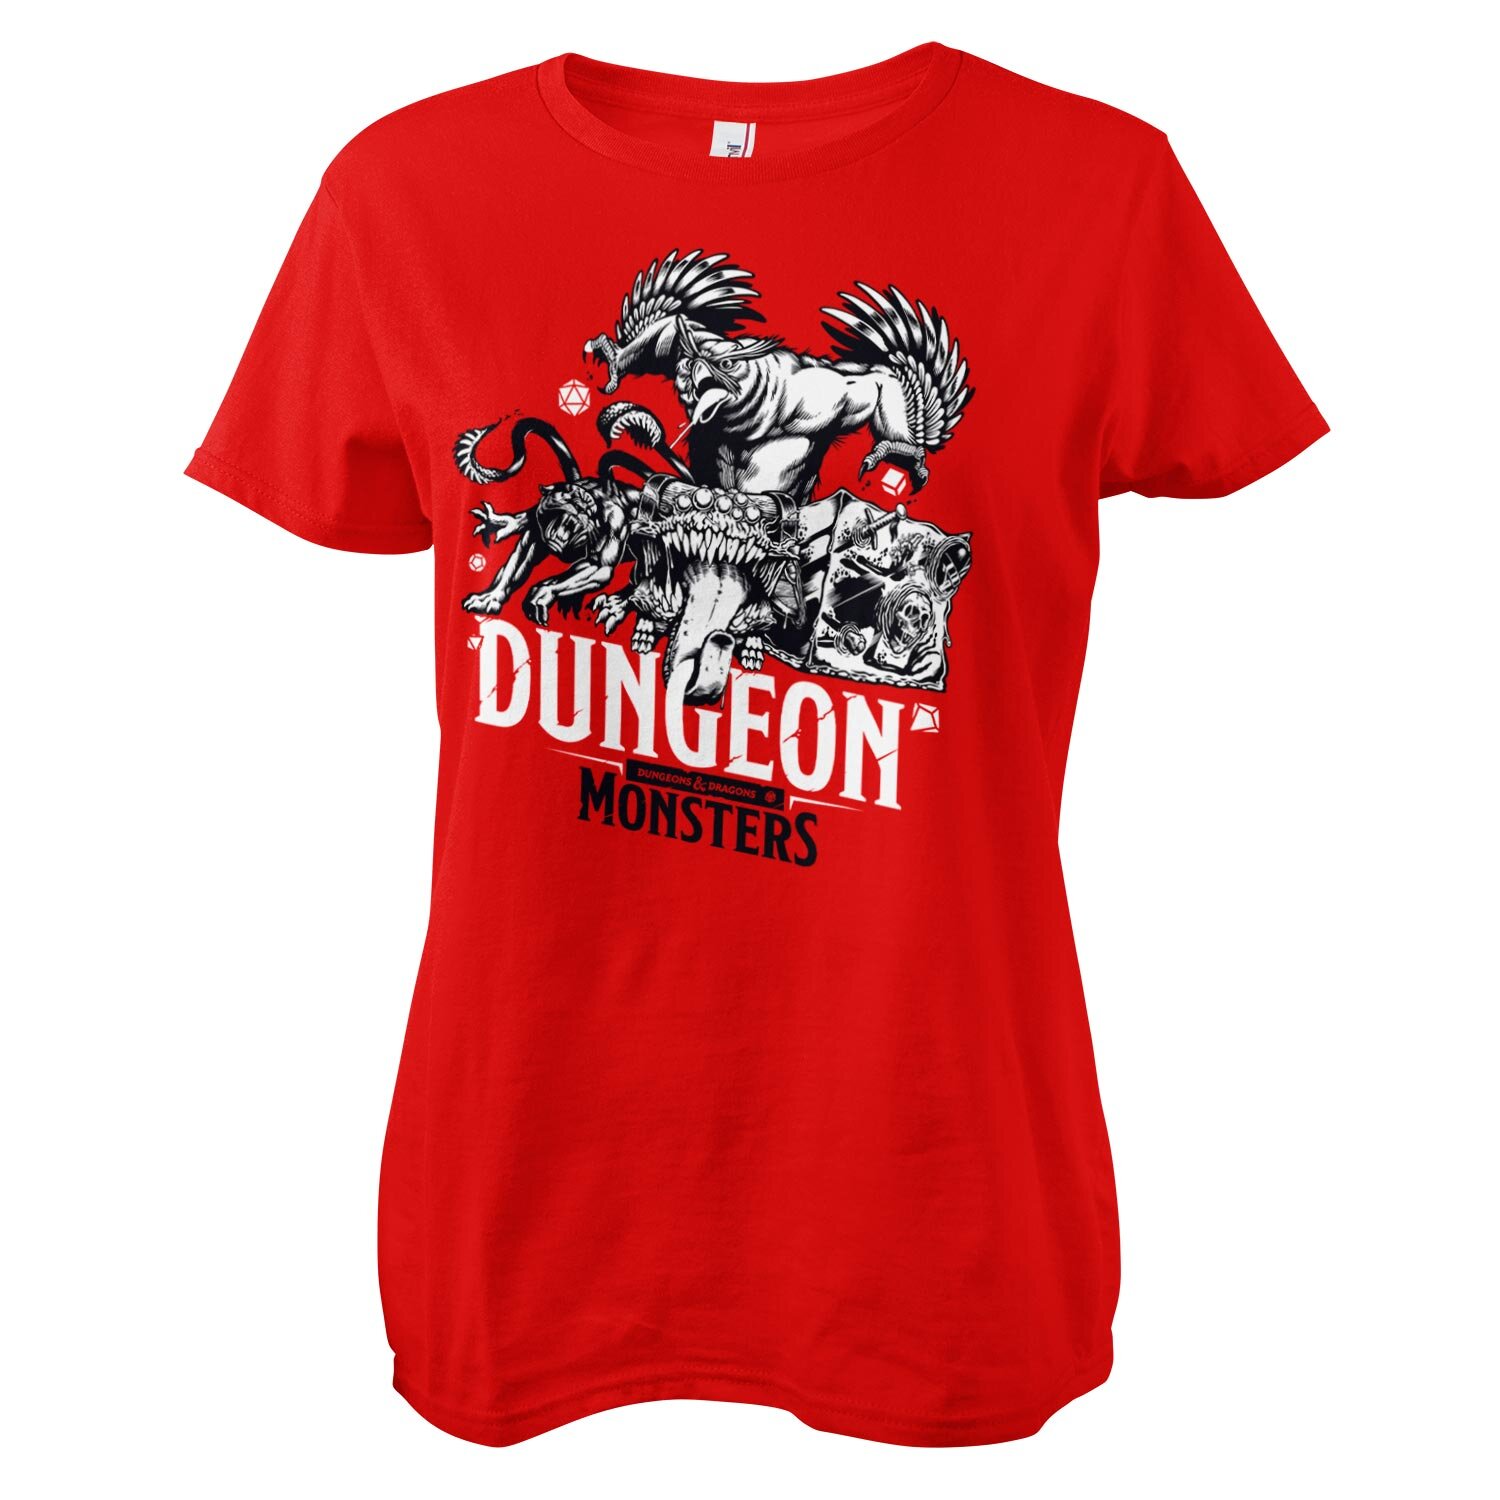 Dungeon Monsters Girly Tee